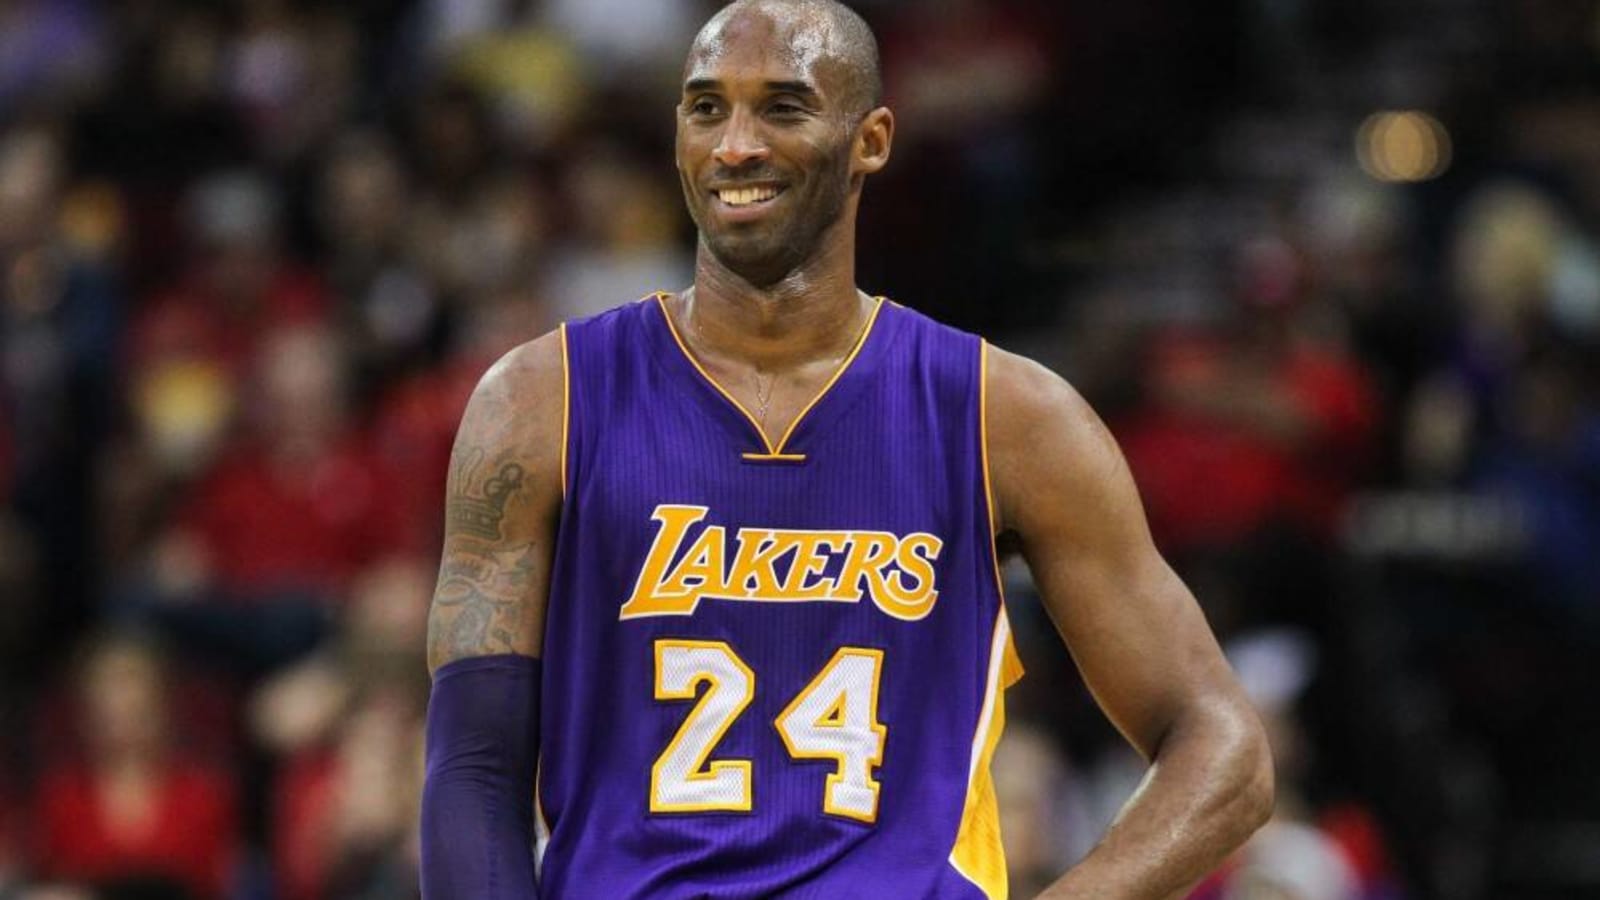 NBA Insider Reveals The Biggest Trade That Never Happened: Kobe Bryant To The Detroit Pistons